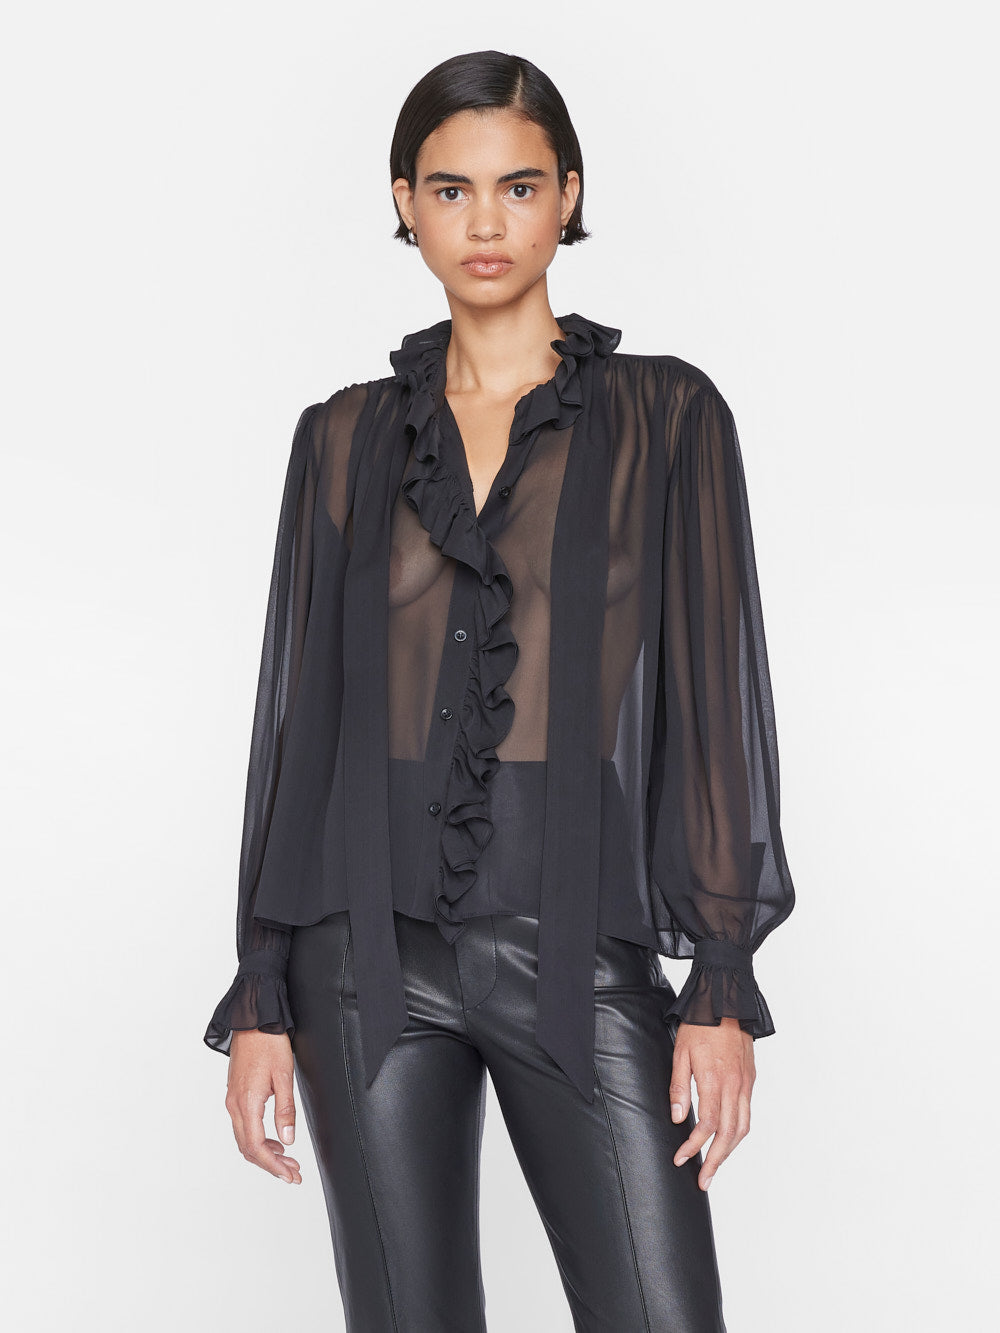 Ruffle Front Button Up Shirt by Frame